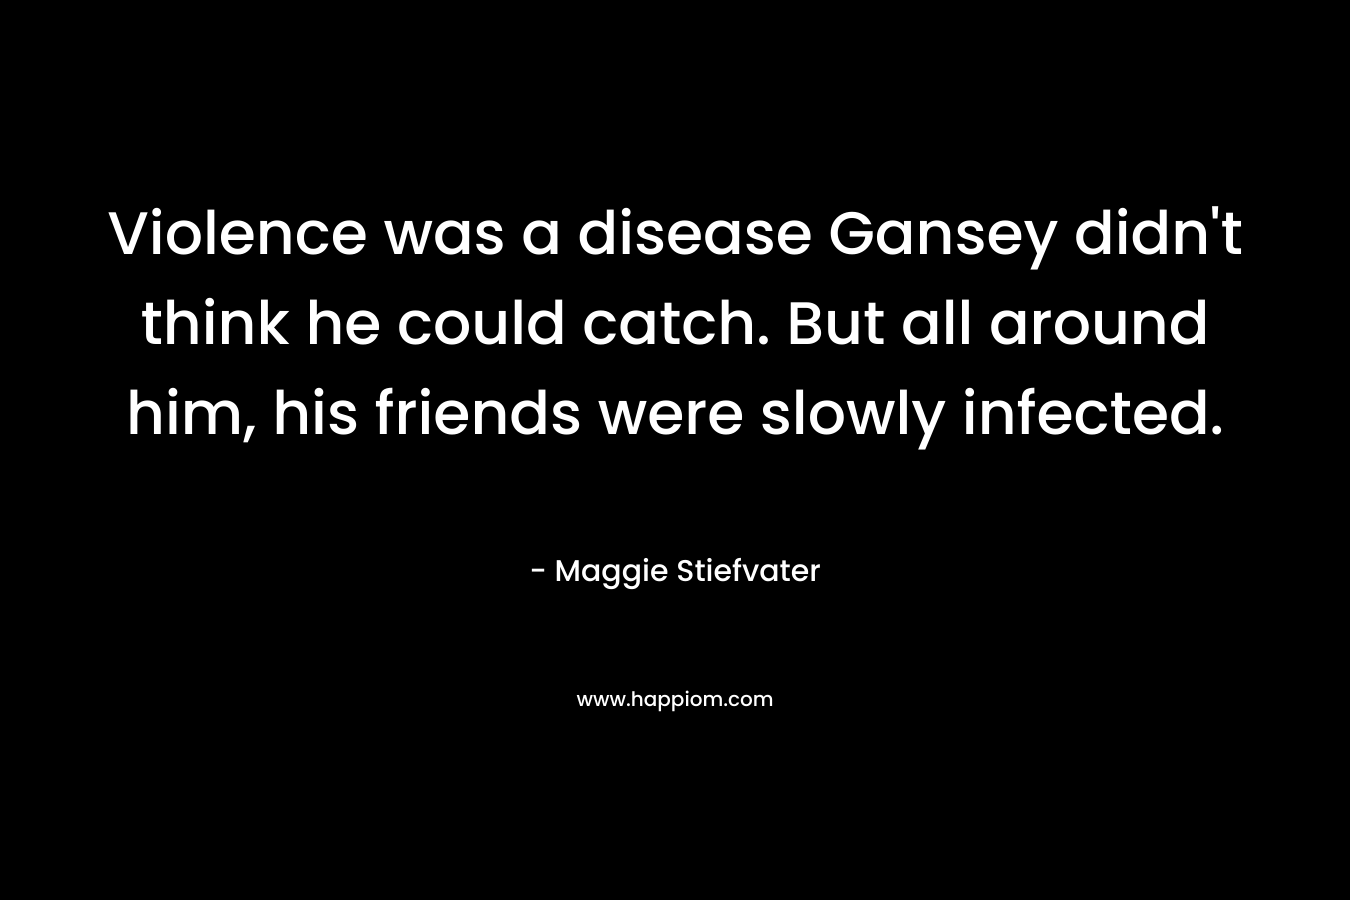 Violence was a disease Gansey didn’t think he could catch. But all around him, his friends were slowly infected. – Maggie Stiefvater